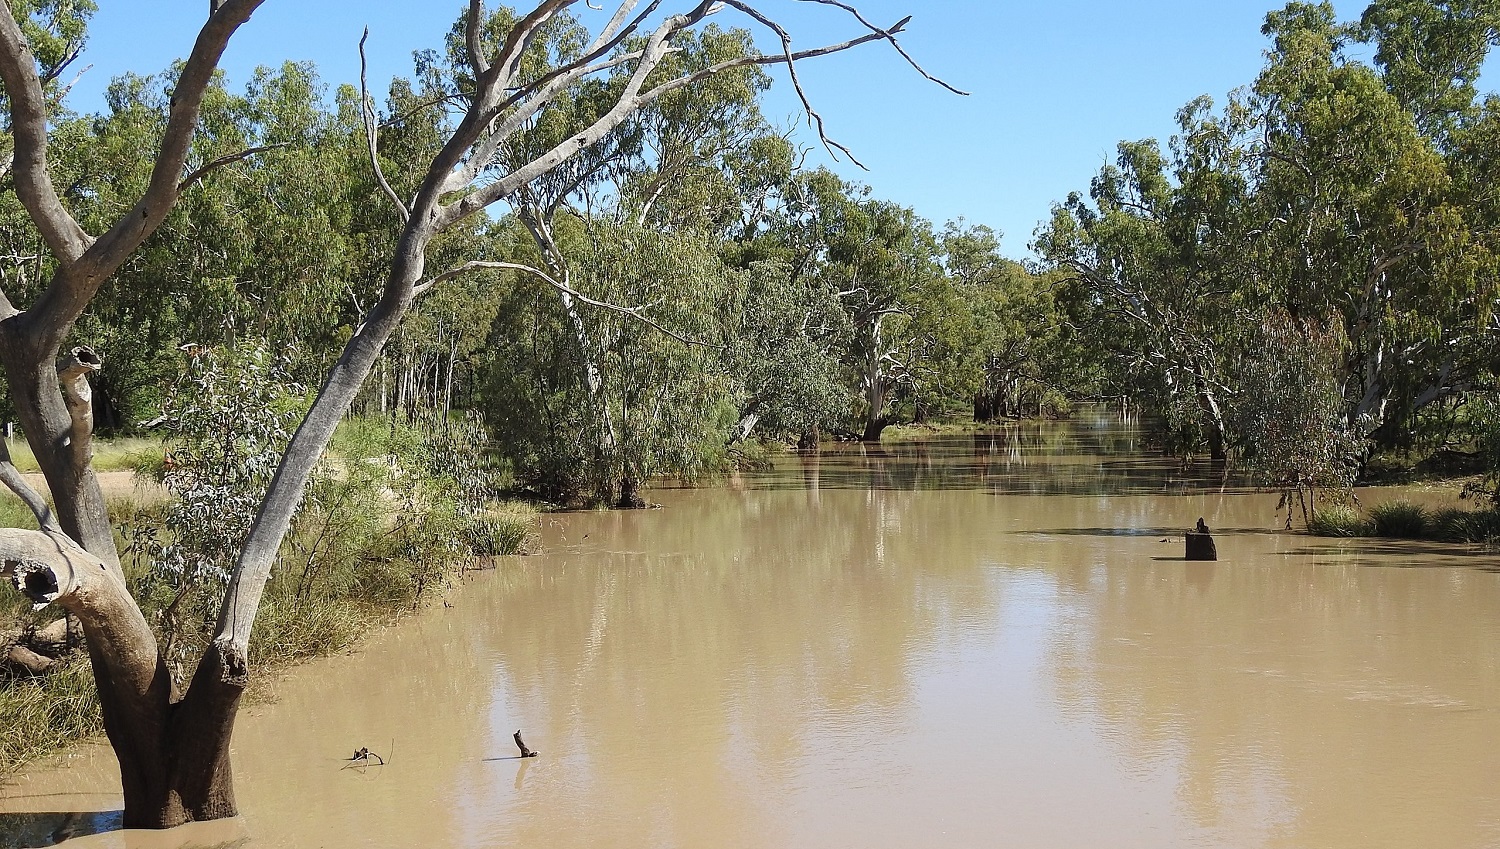 The Greatest Floods in Australia in the Last 50 Years